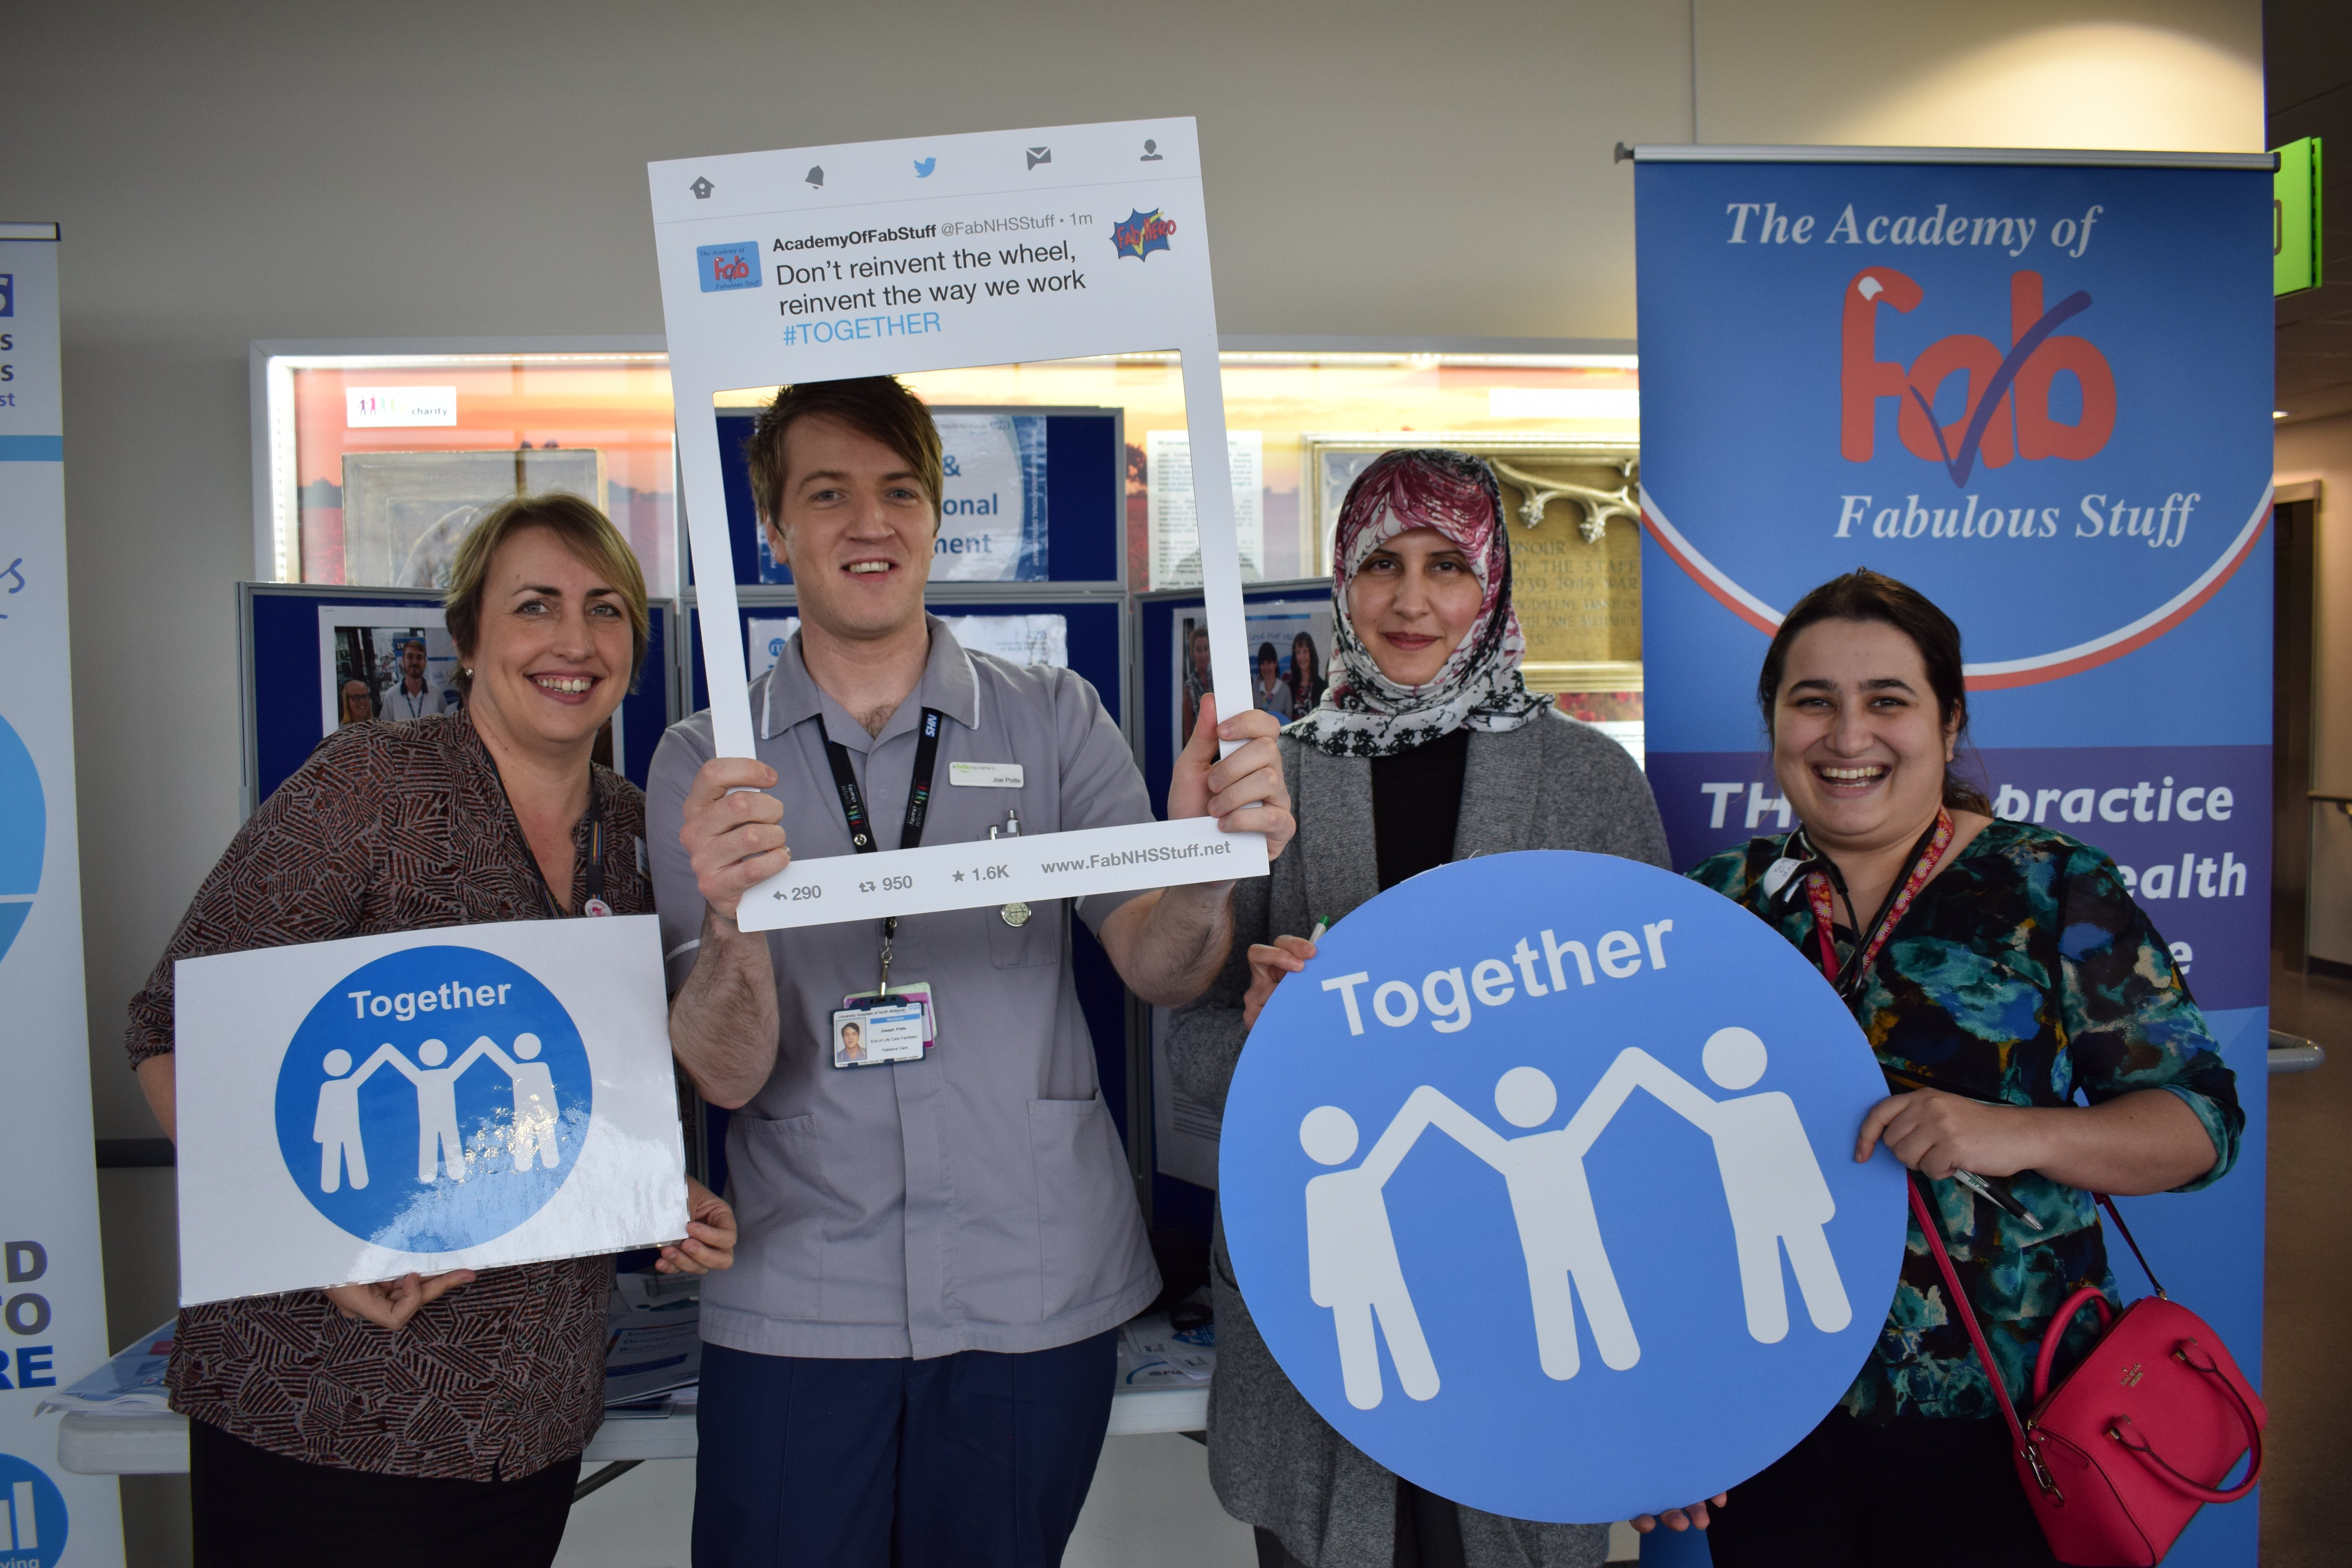 University Hospitals of North Midlands NHS Trust featured image